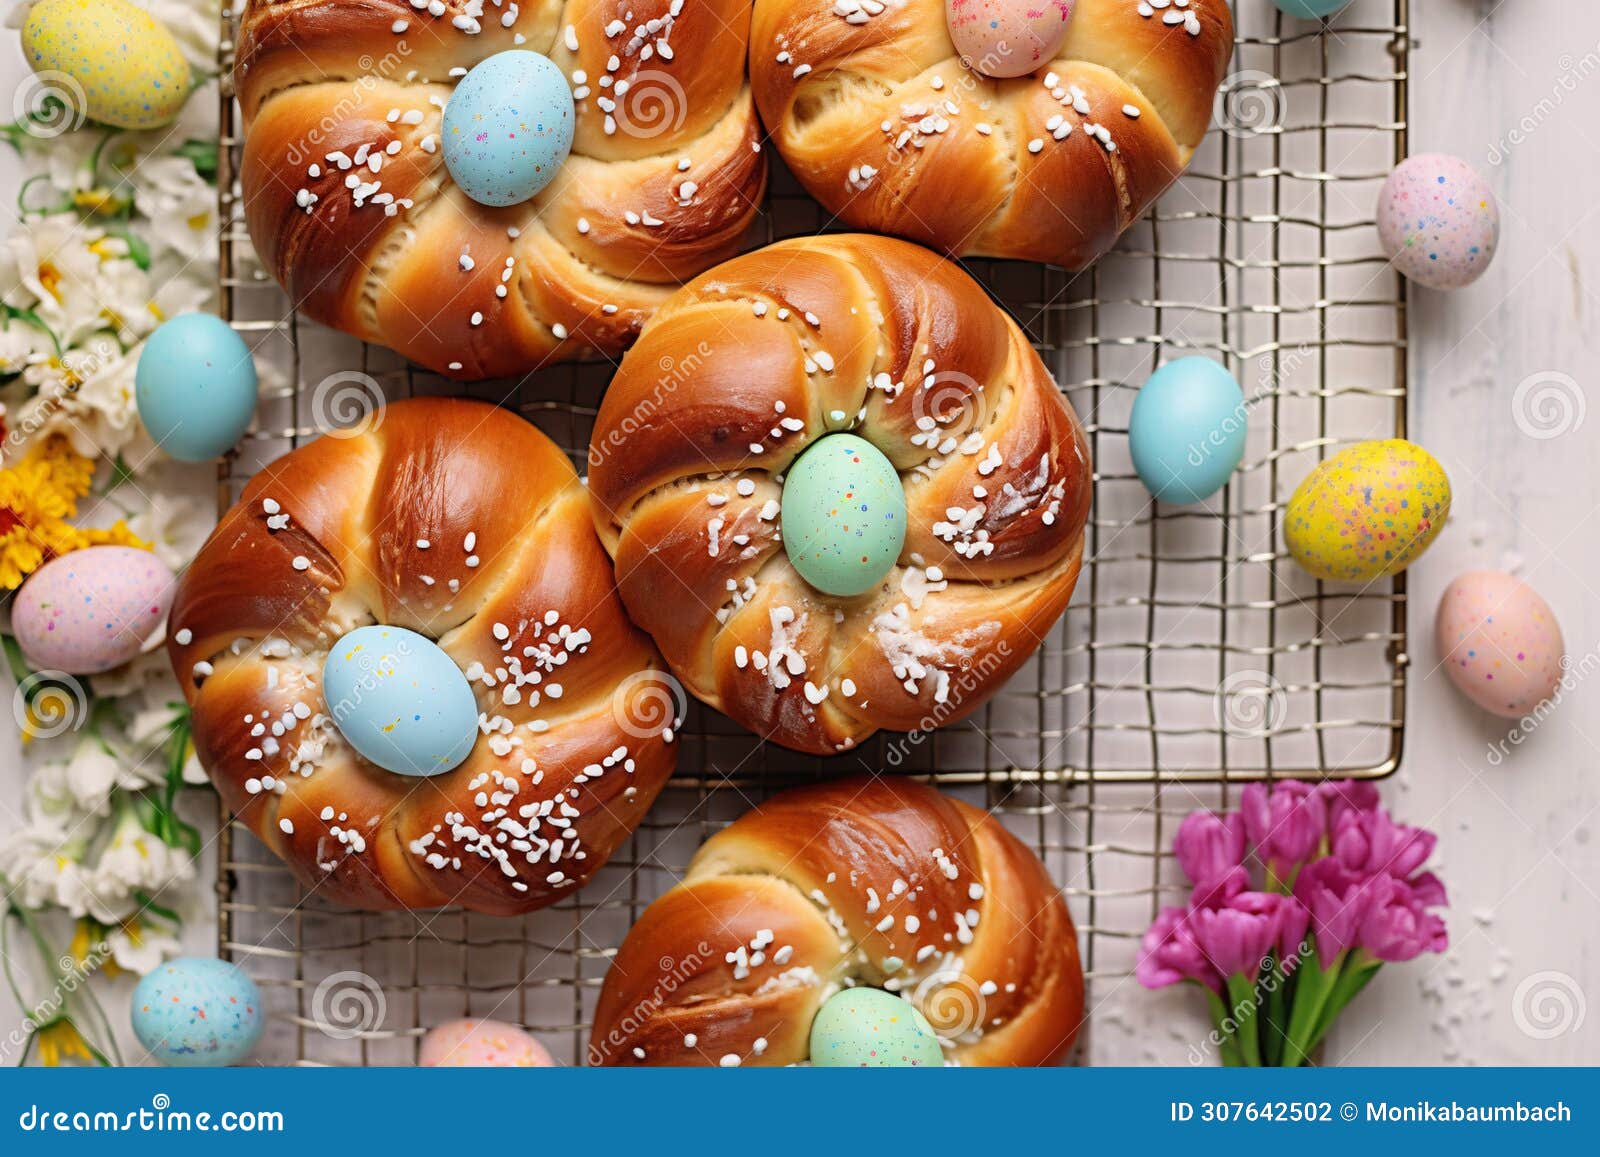 top view of pane di pasqua, traditional easter bread with easter eggs